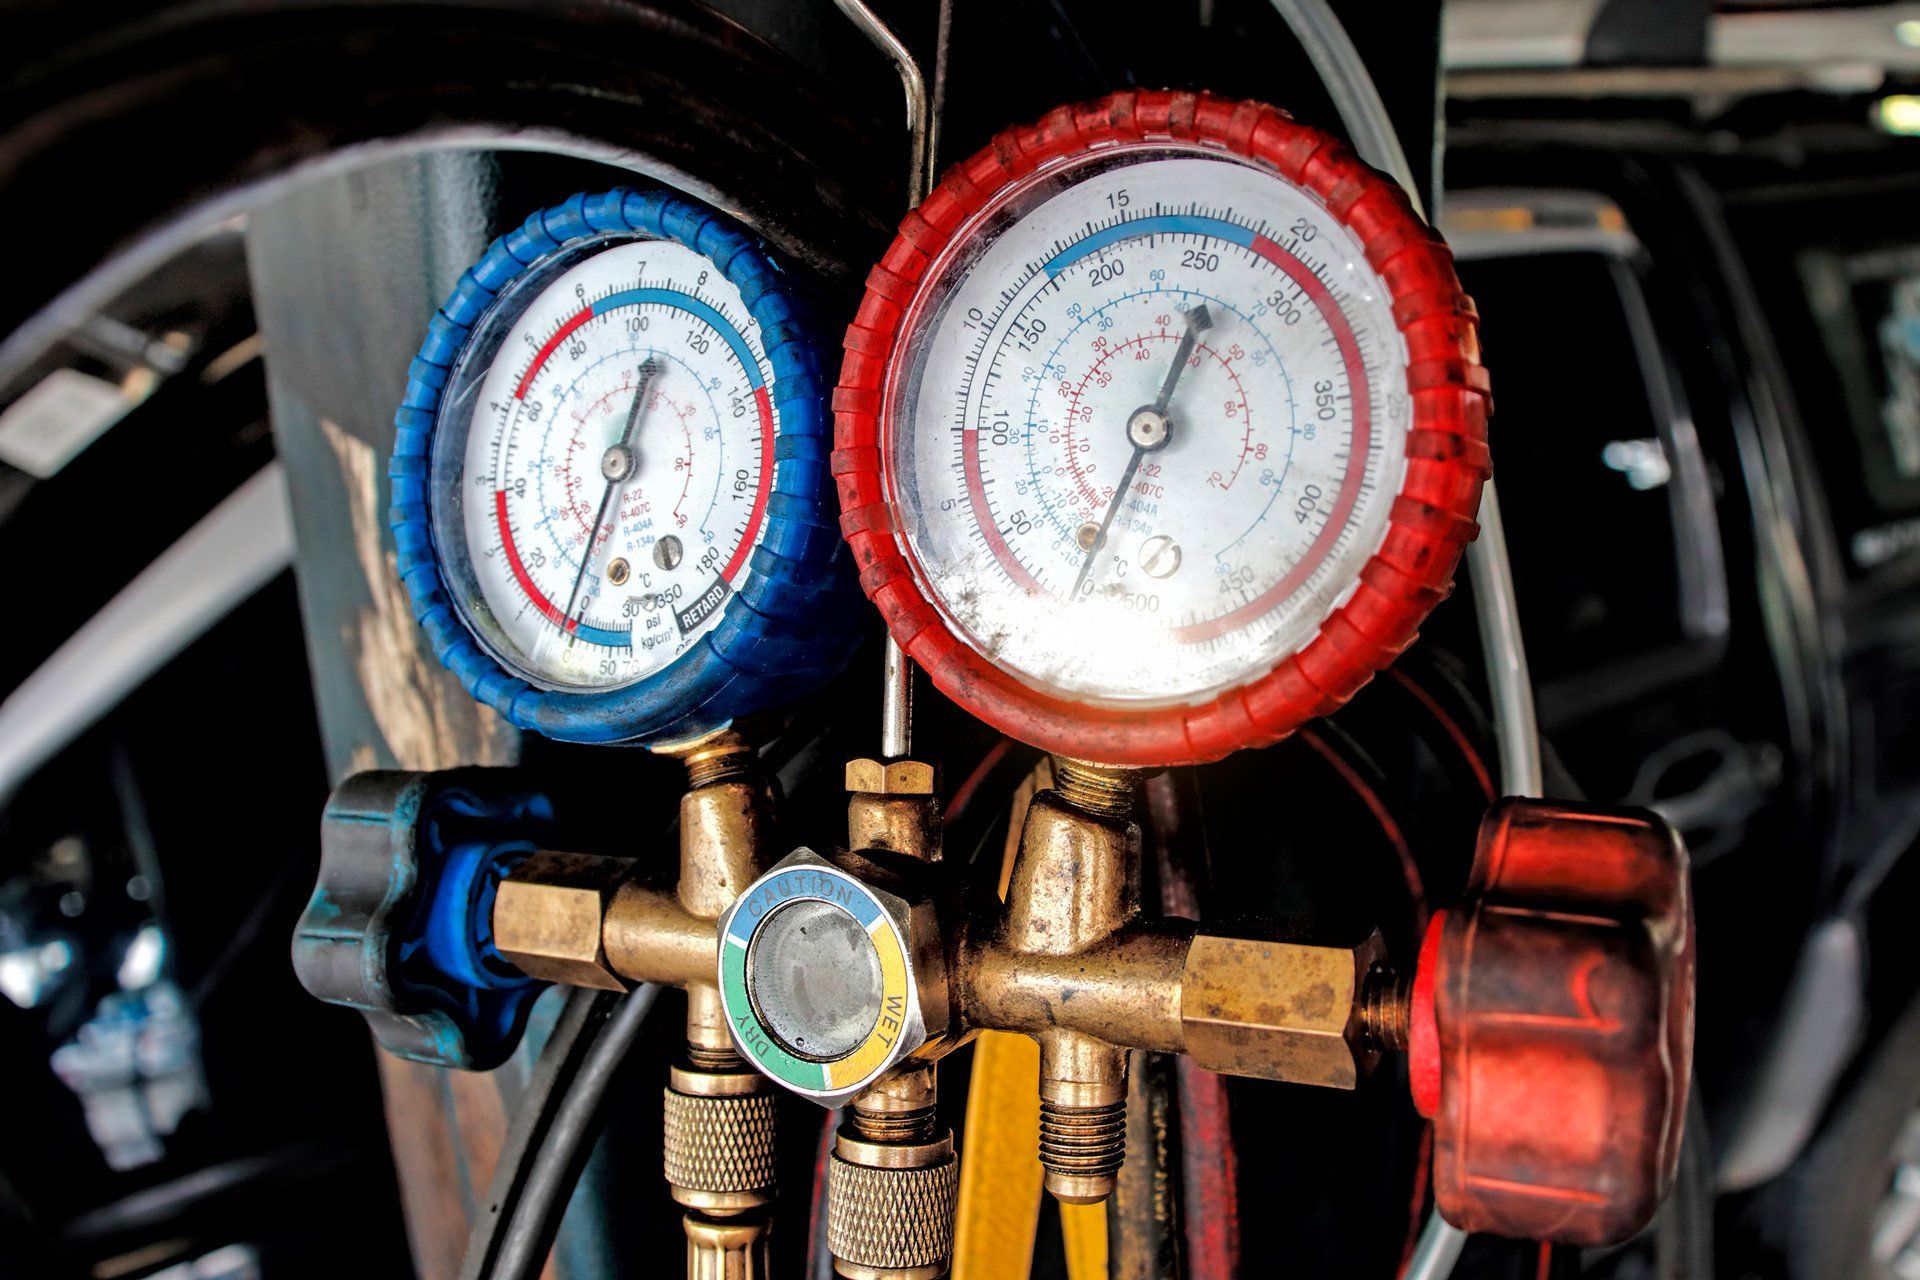 Red and blue gauge for aircon repair | Joondalup, WA | Joondalup 4x4 & AllGas